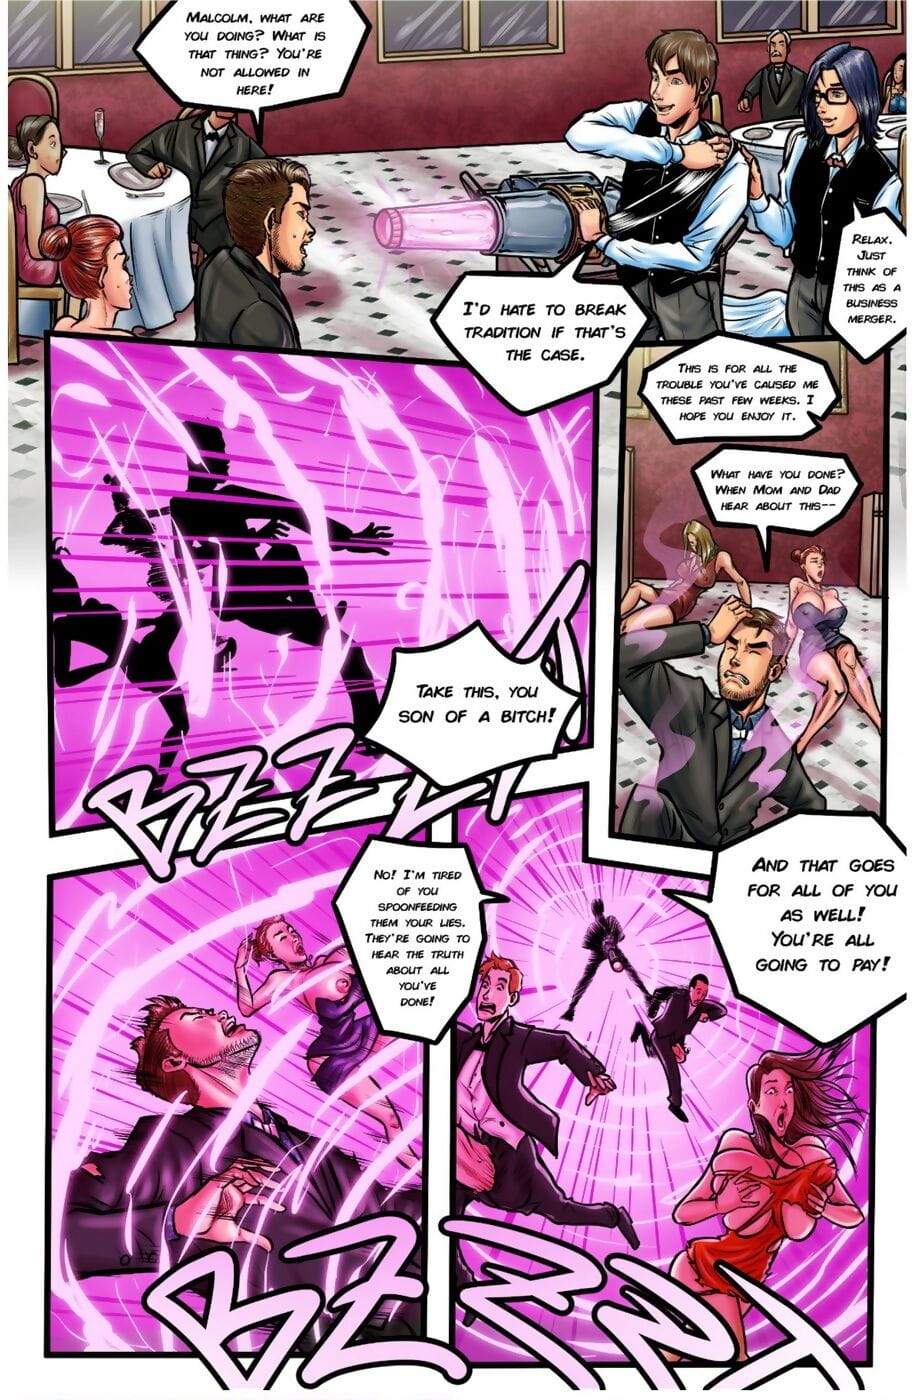 Bot- Seduction Technology Issue 4 page 1